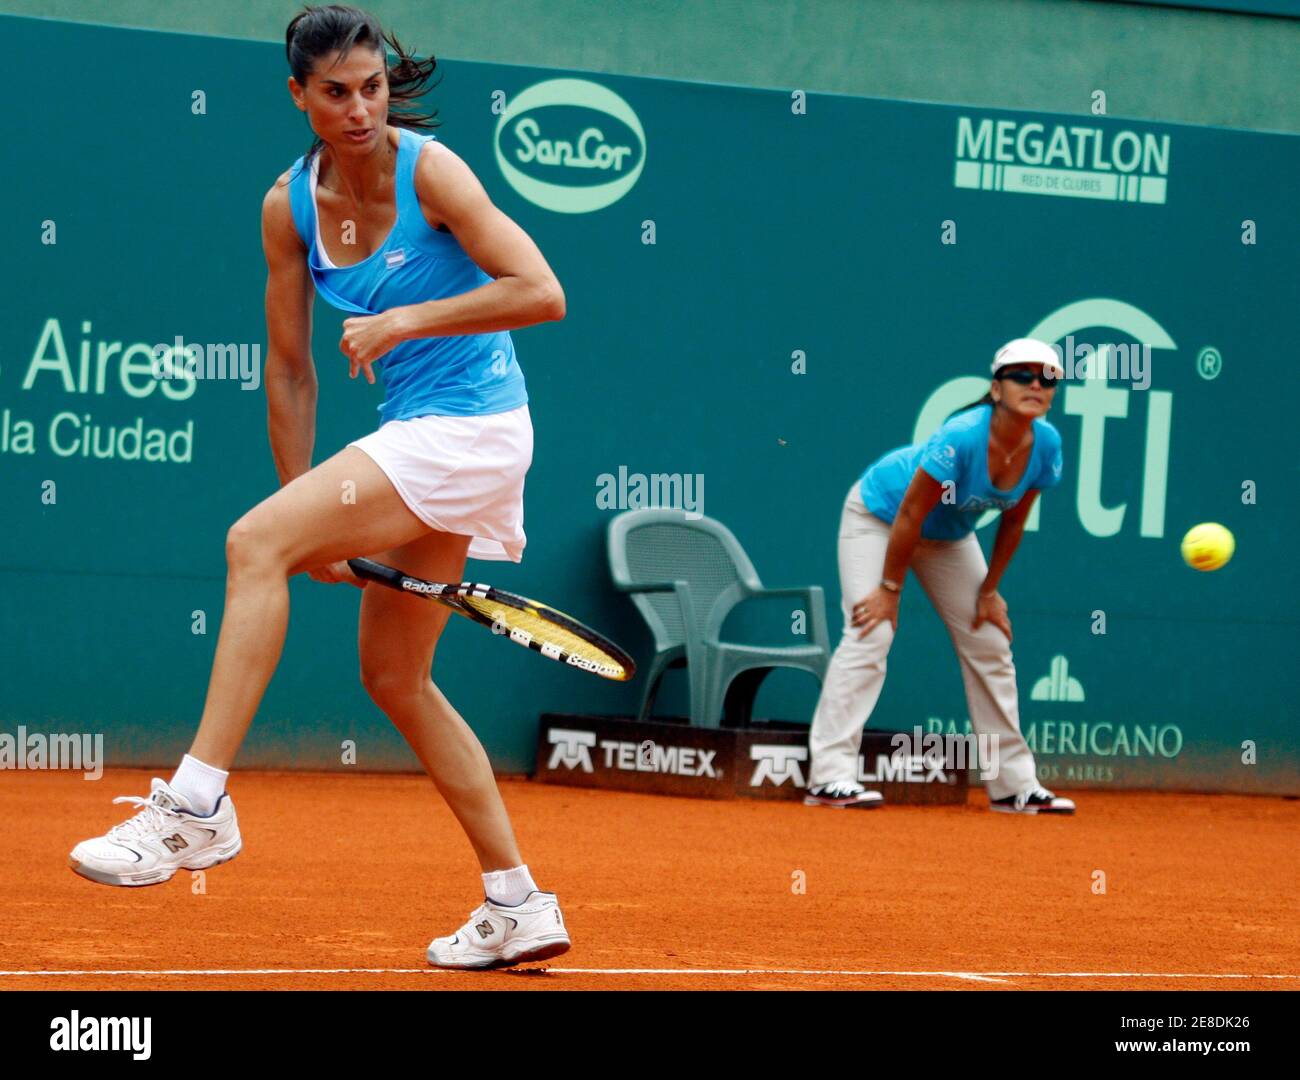 Gabriela Sabatini of Argentina plays a shot between her legs during her  doubles tennis match with Martina Navratilova of the U.S. against Paola  Suarez and Patricia Tarabini of Argentina in Buenos Aires